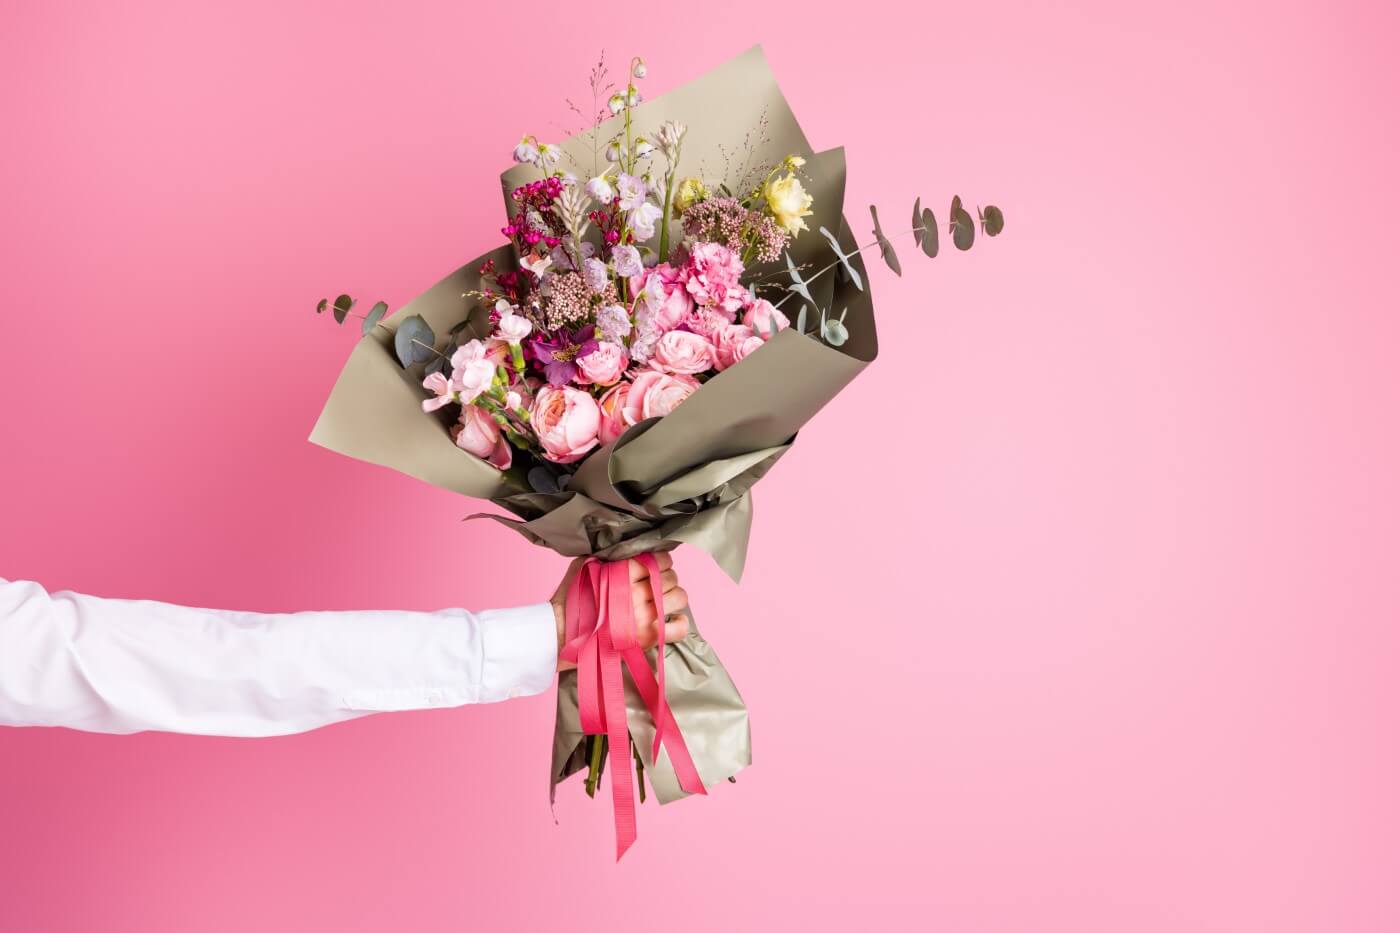 A Modern Take on the Classic Anniversary Gift-Why Flowers Make the Perfect Choice